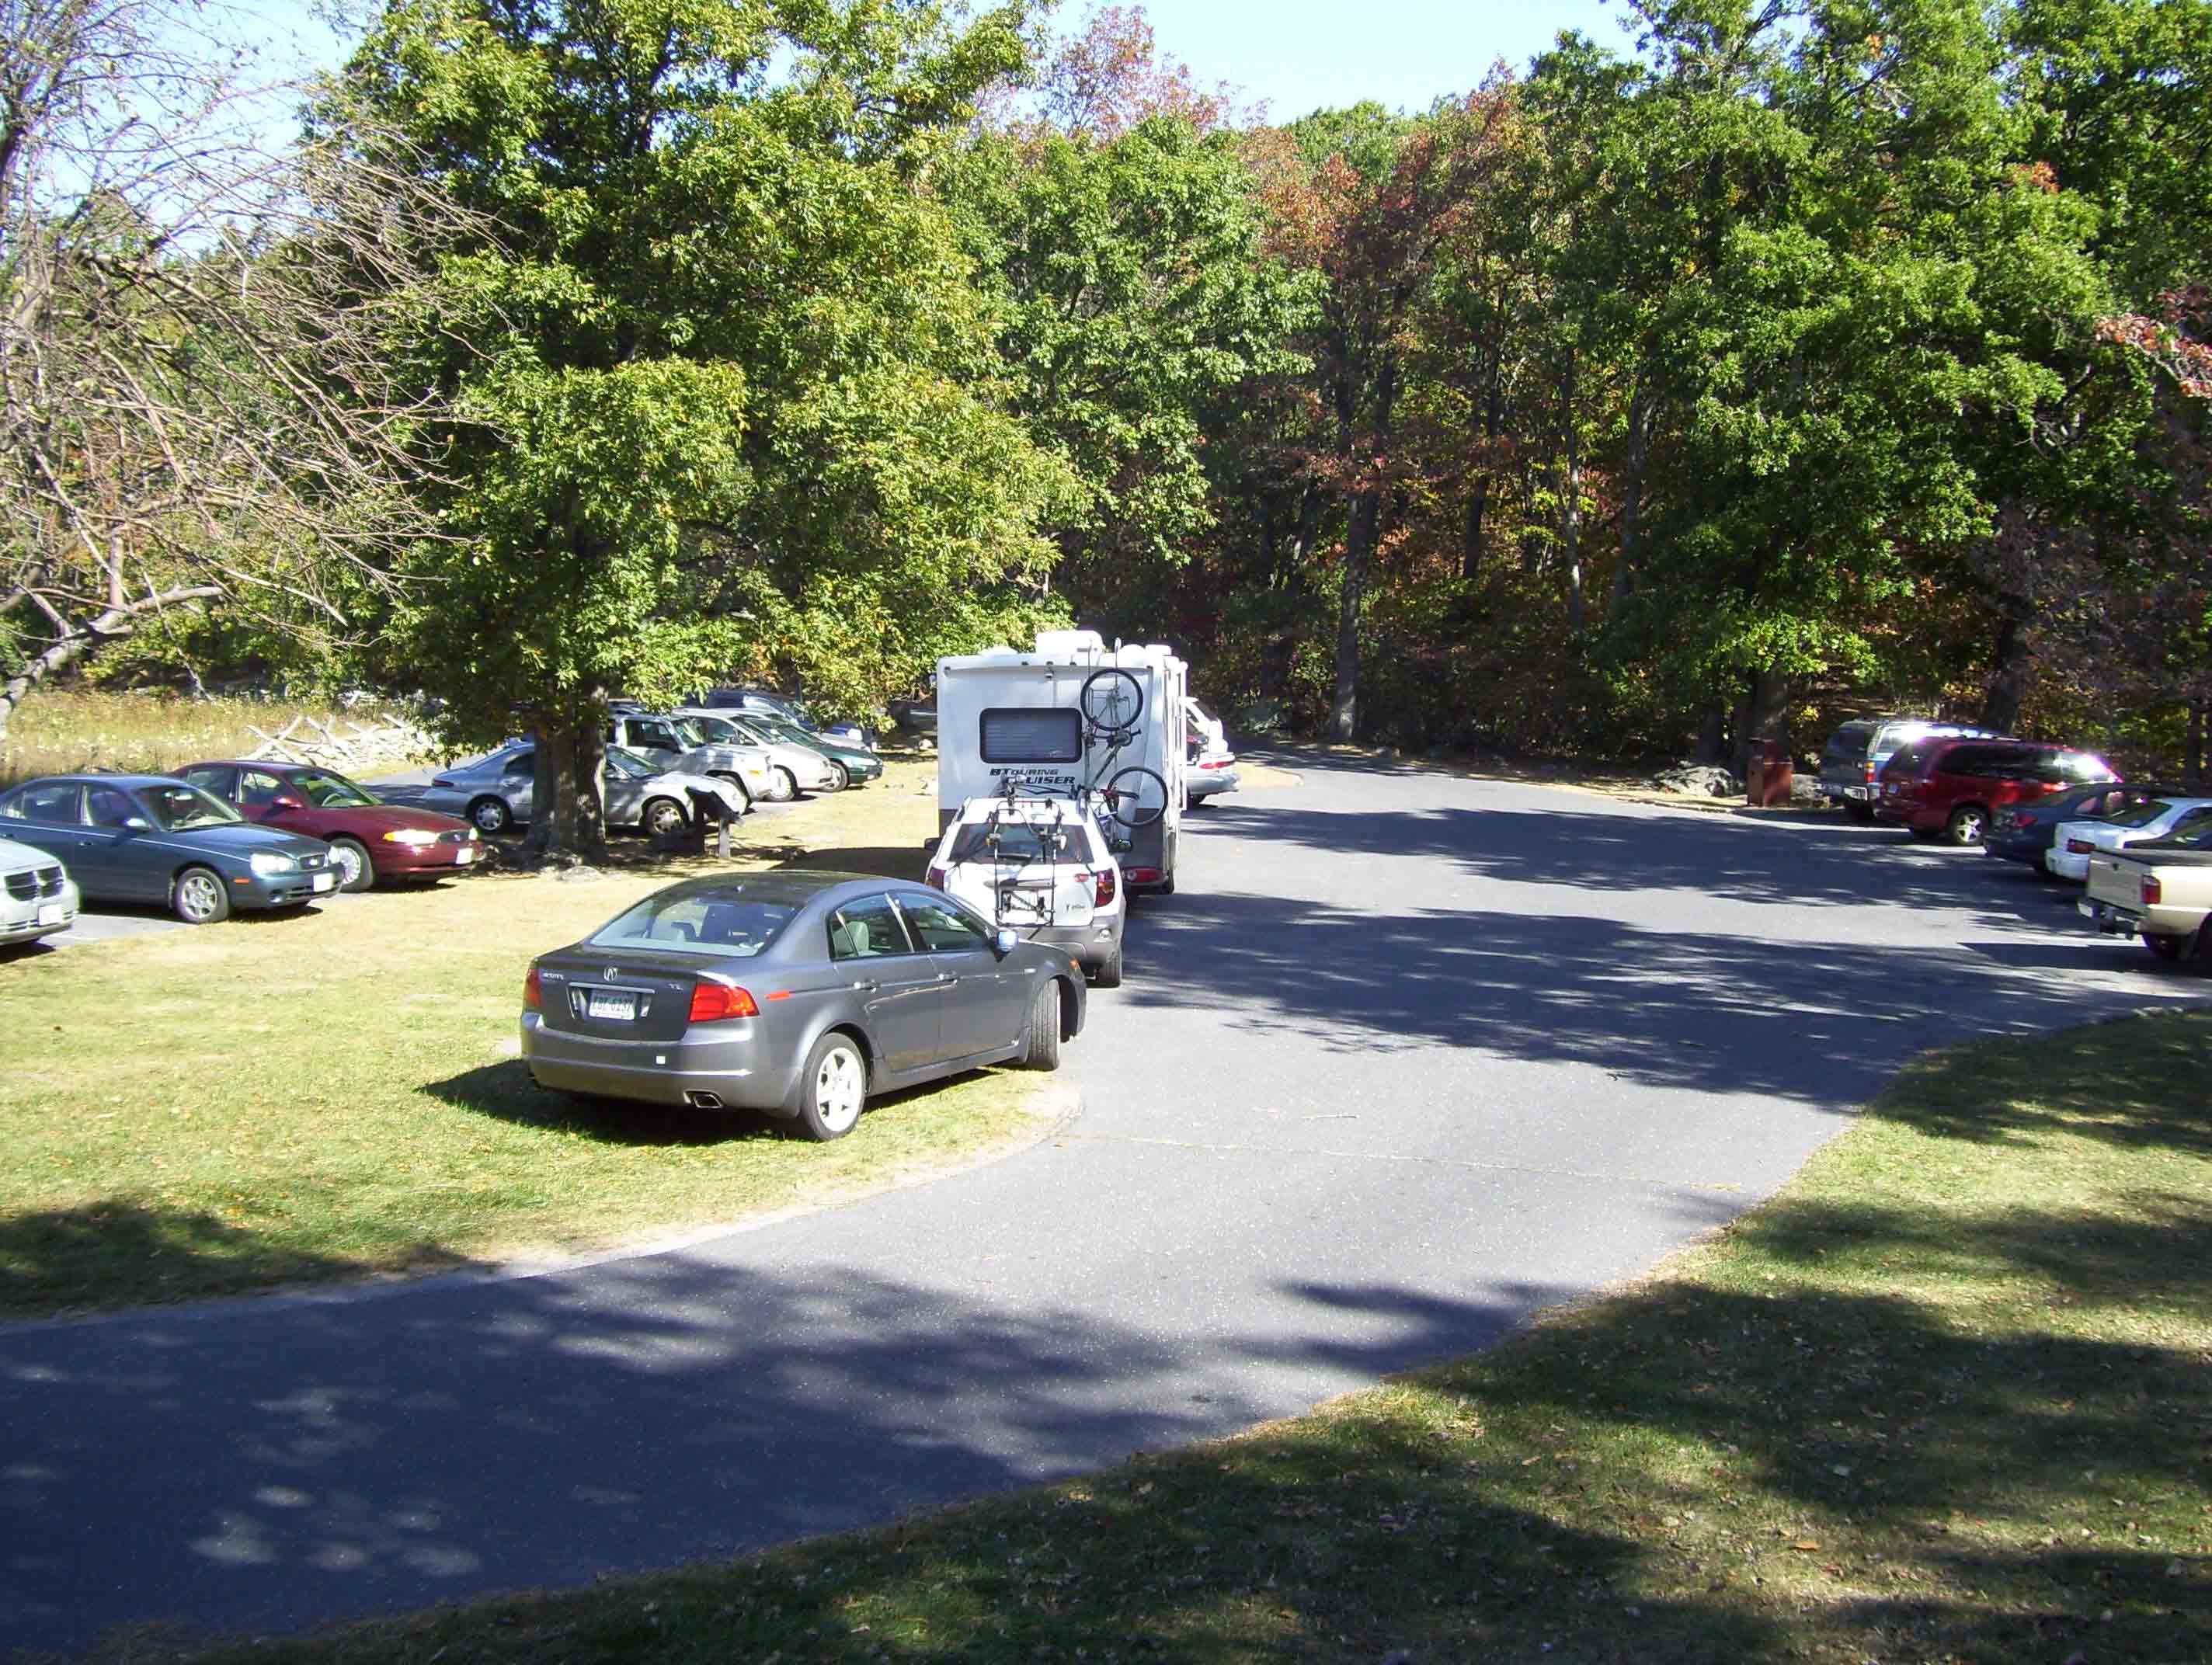 Parking area for Humpback Rocks. From here there is access to the AT at three points. Access to the trail at MM 6.5 follows a blue-blazed trail at the far end of the lot (north). The unblazed access to the trail at MM 7.6 starts just to the right of where the red car in the shade on the right (east) side of the picture was parked when picture was taken. Access to the trail at MM 10.5 follows a blue-blazed trail behind where the picture was taken (south).  Courtesy dlcul@conncoll.edu